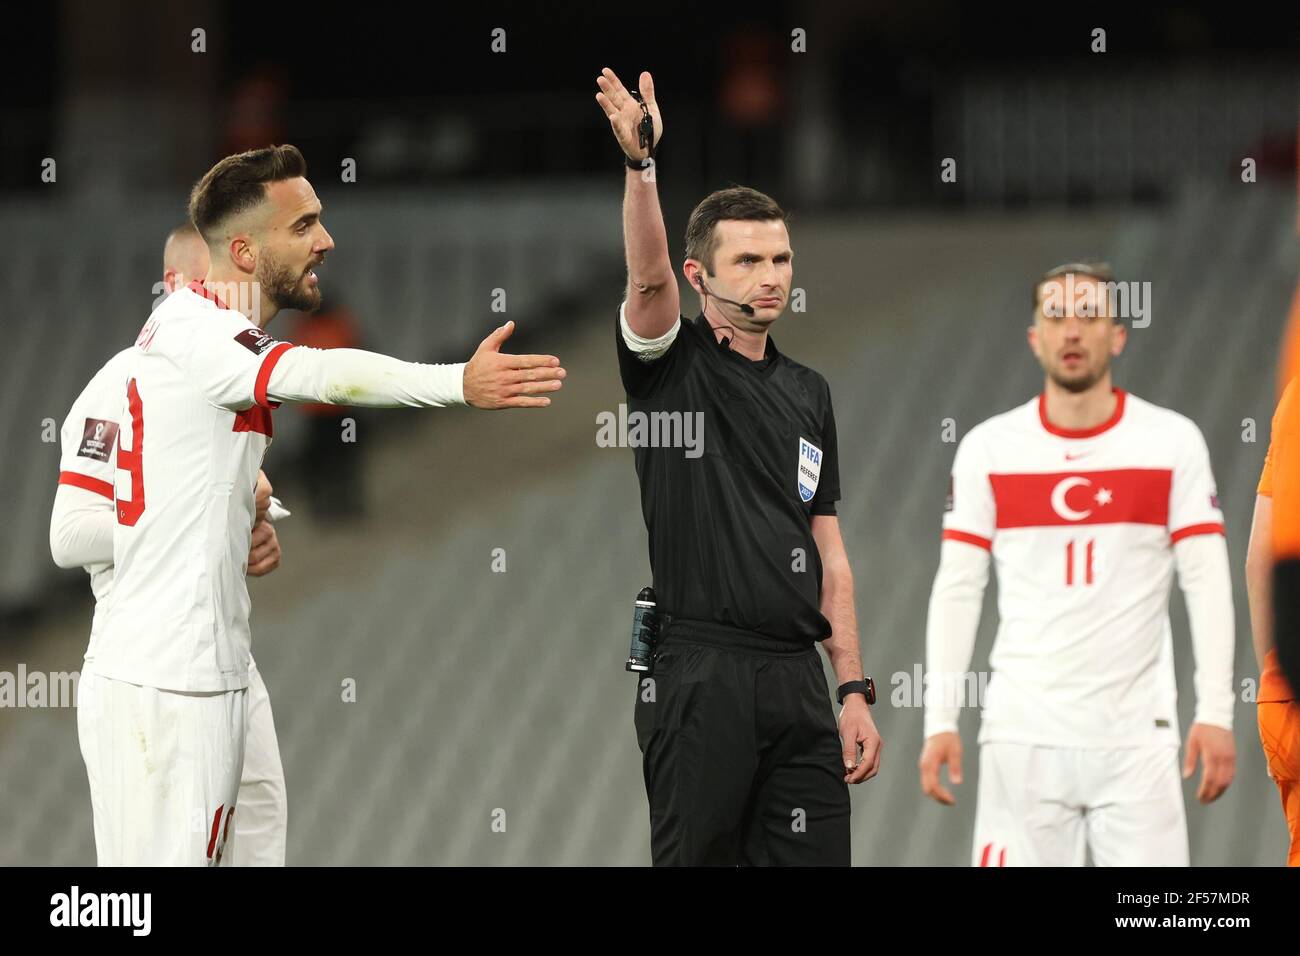 ISTANBUL, 24-03-2021, Ataturk Olympic Stadium. European Qualifiers Group G for the FIFA World Cup 2022. Turkey - Netherlands. referee Michael Oliver (Photo by Pro Shots/Sipa USA) *** World Rights Except Austria and The Netherlands *** Stock Photo